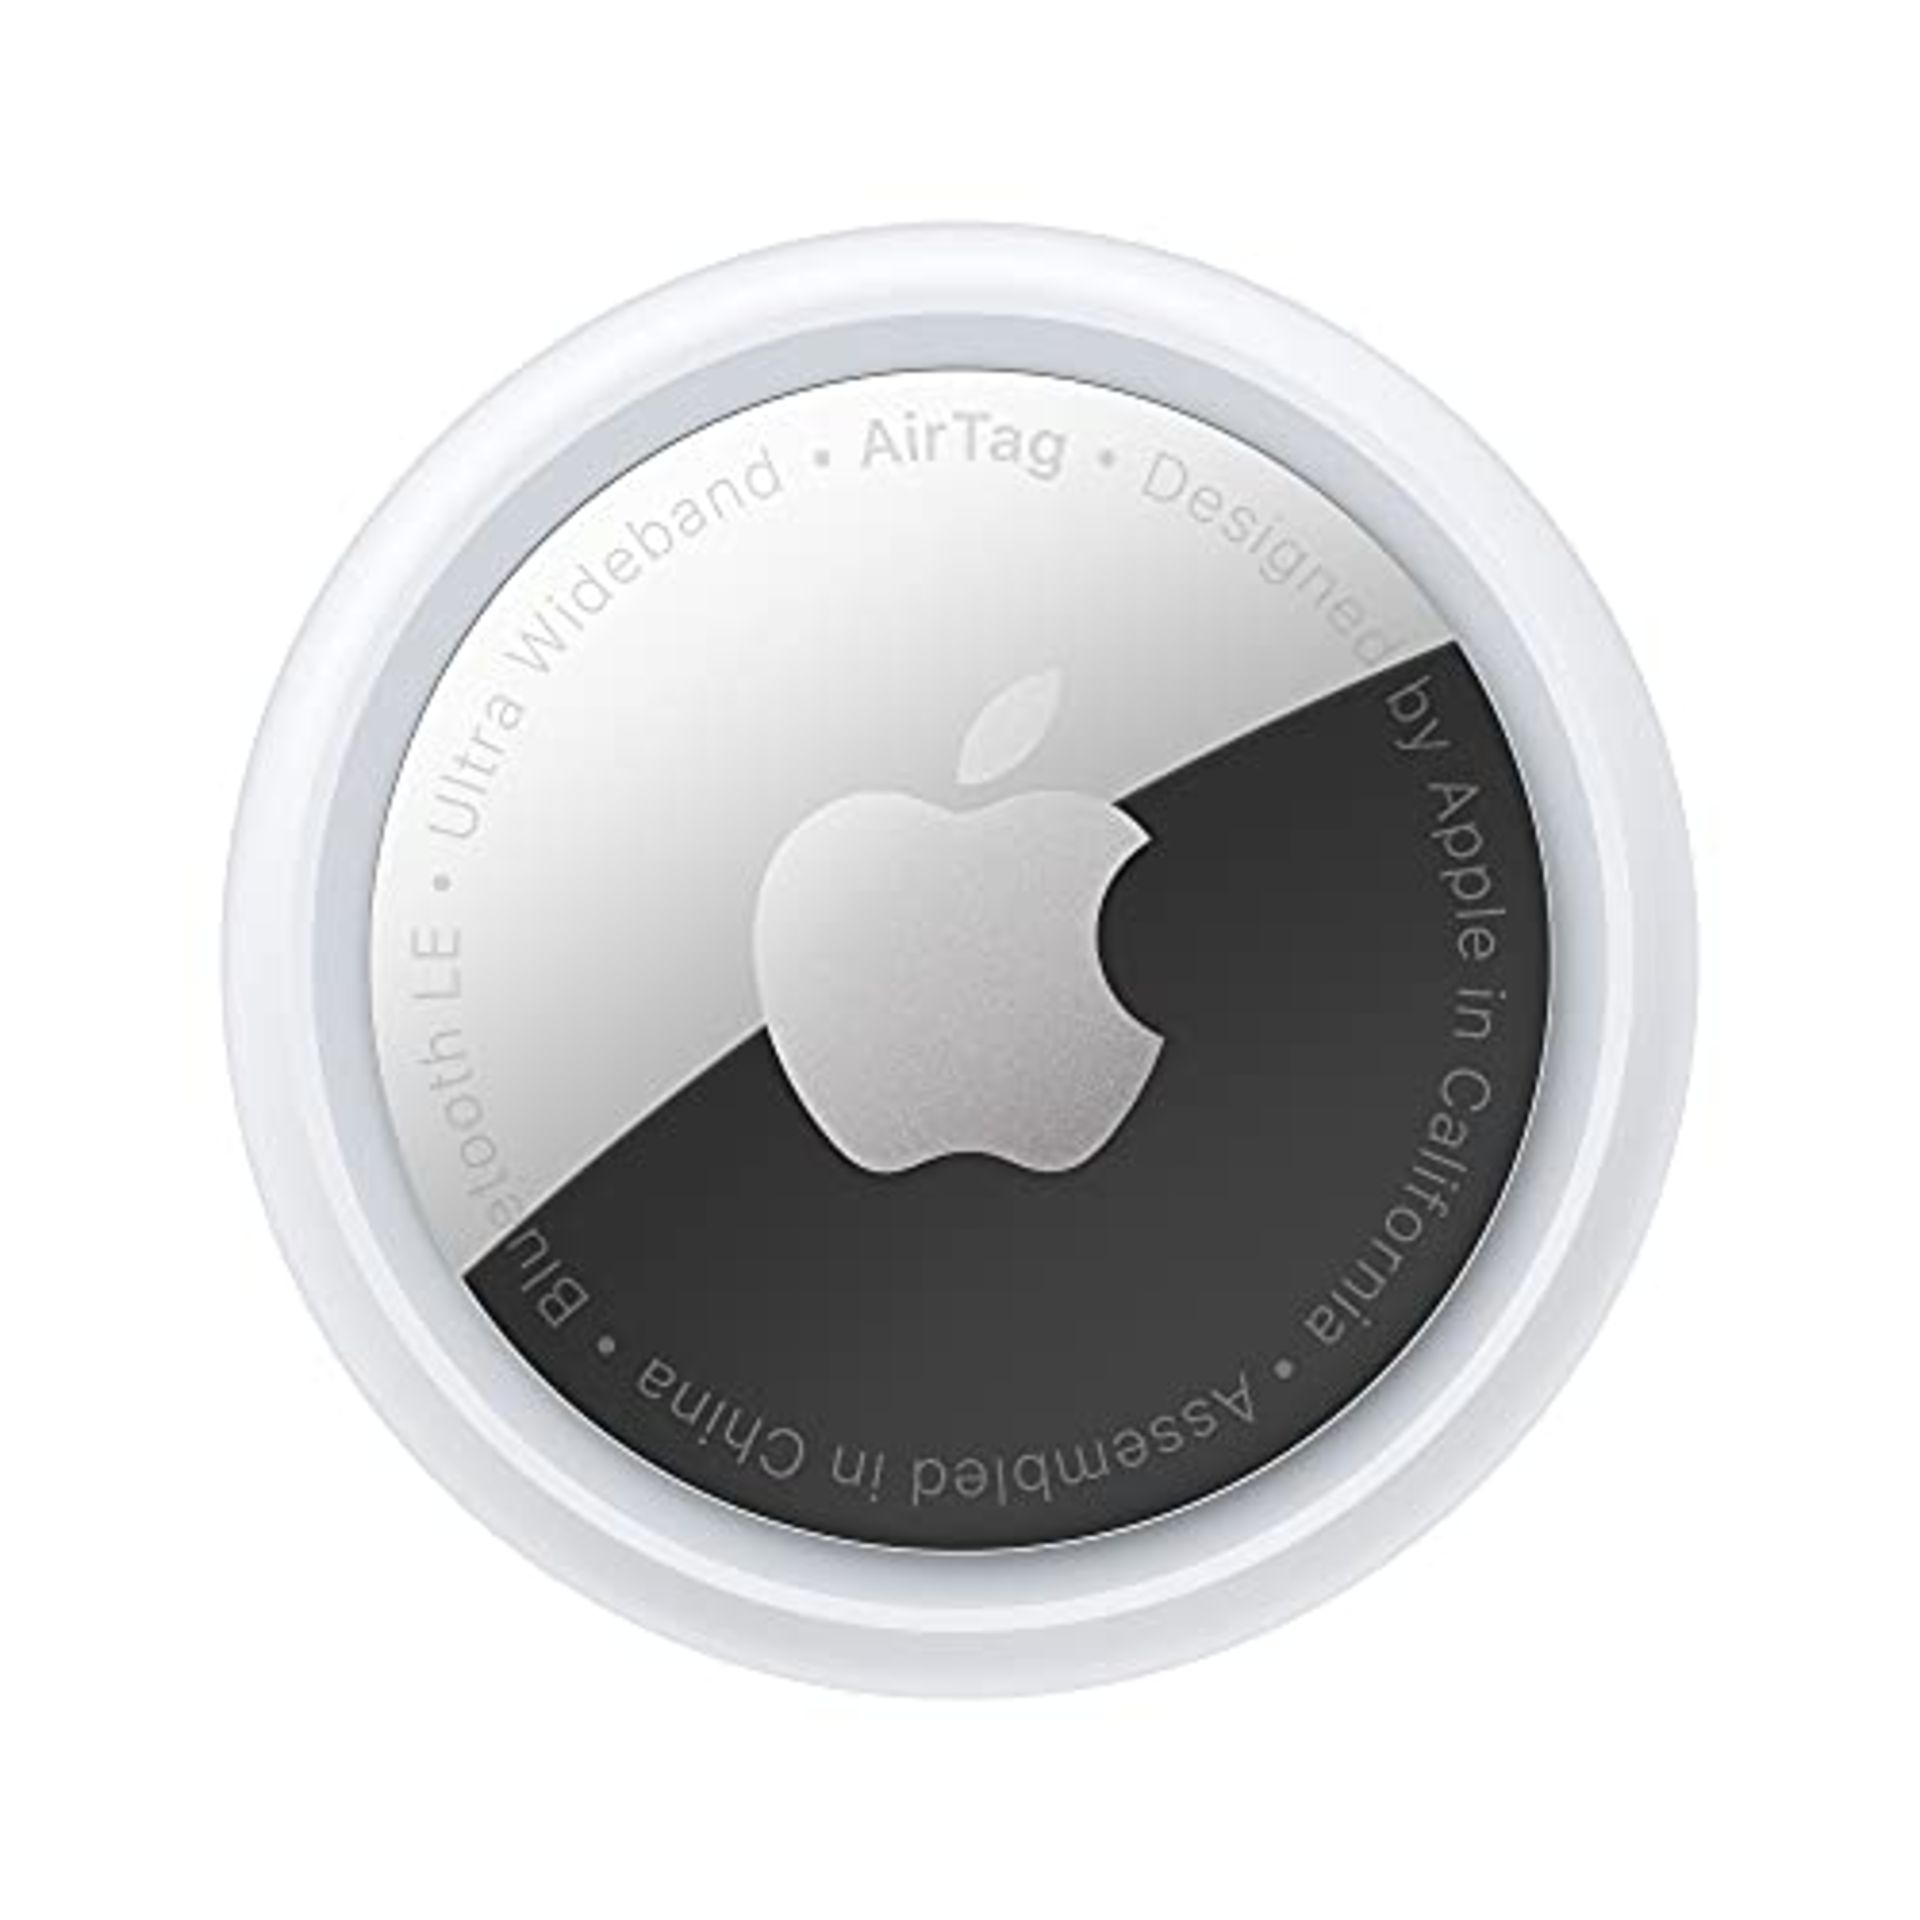 Apple AirTag - Image 10 of 15